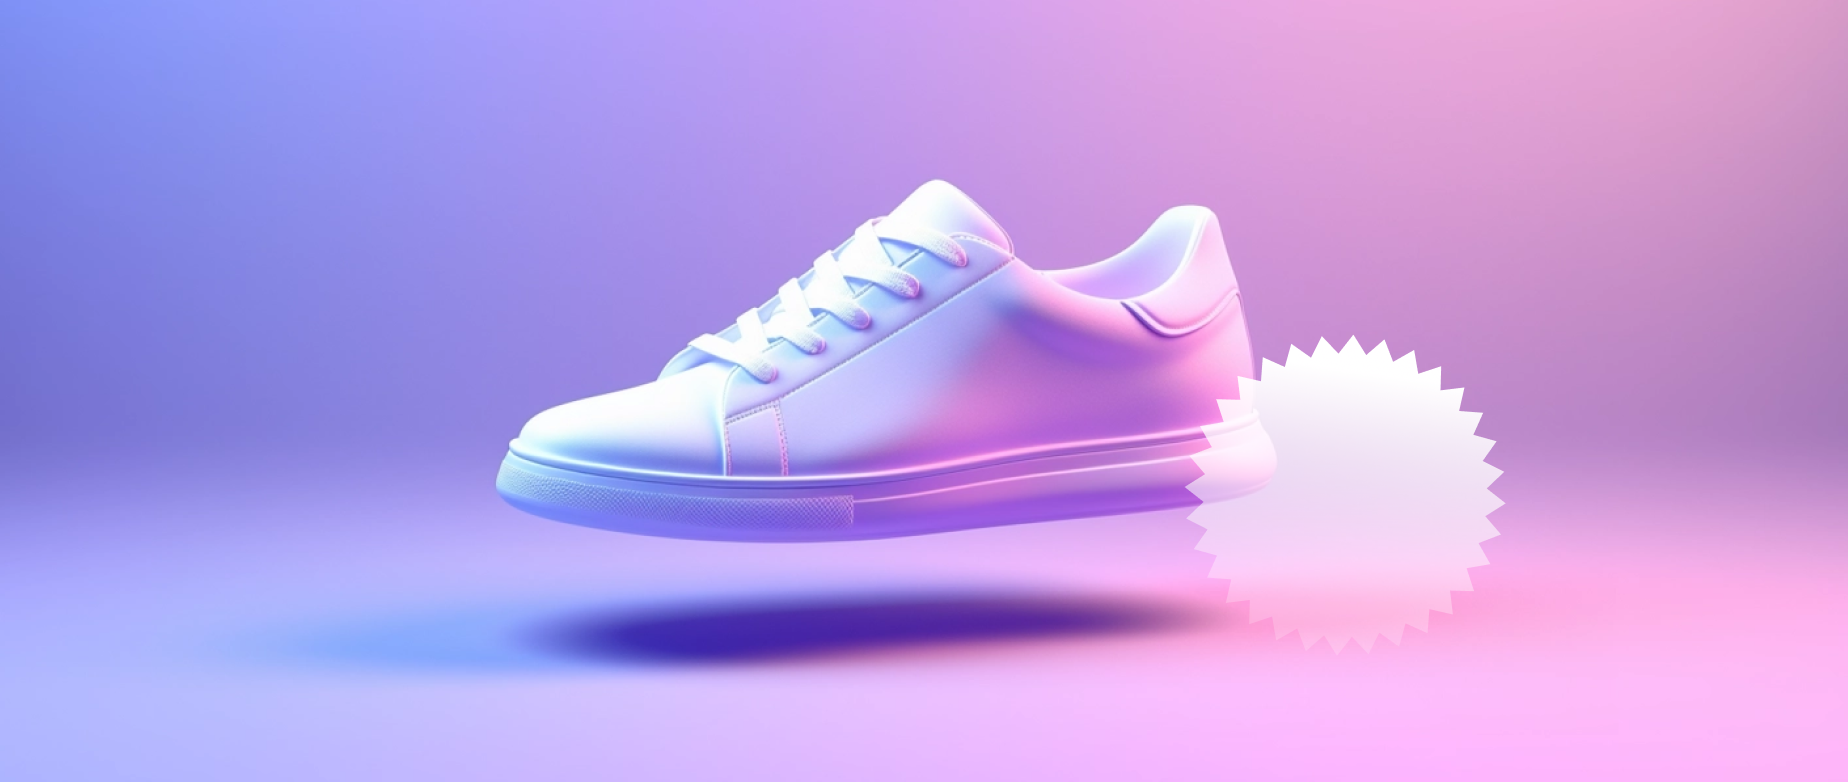 A white shoe with an award symbol on 
a pink and blue background.